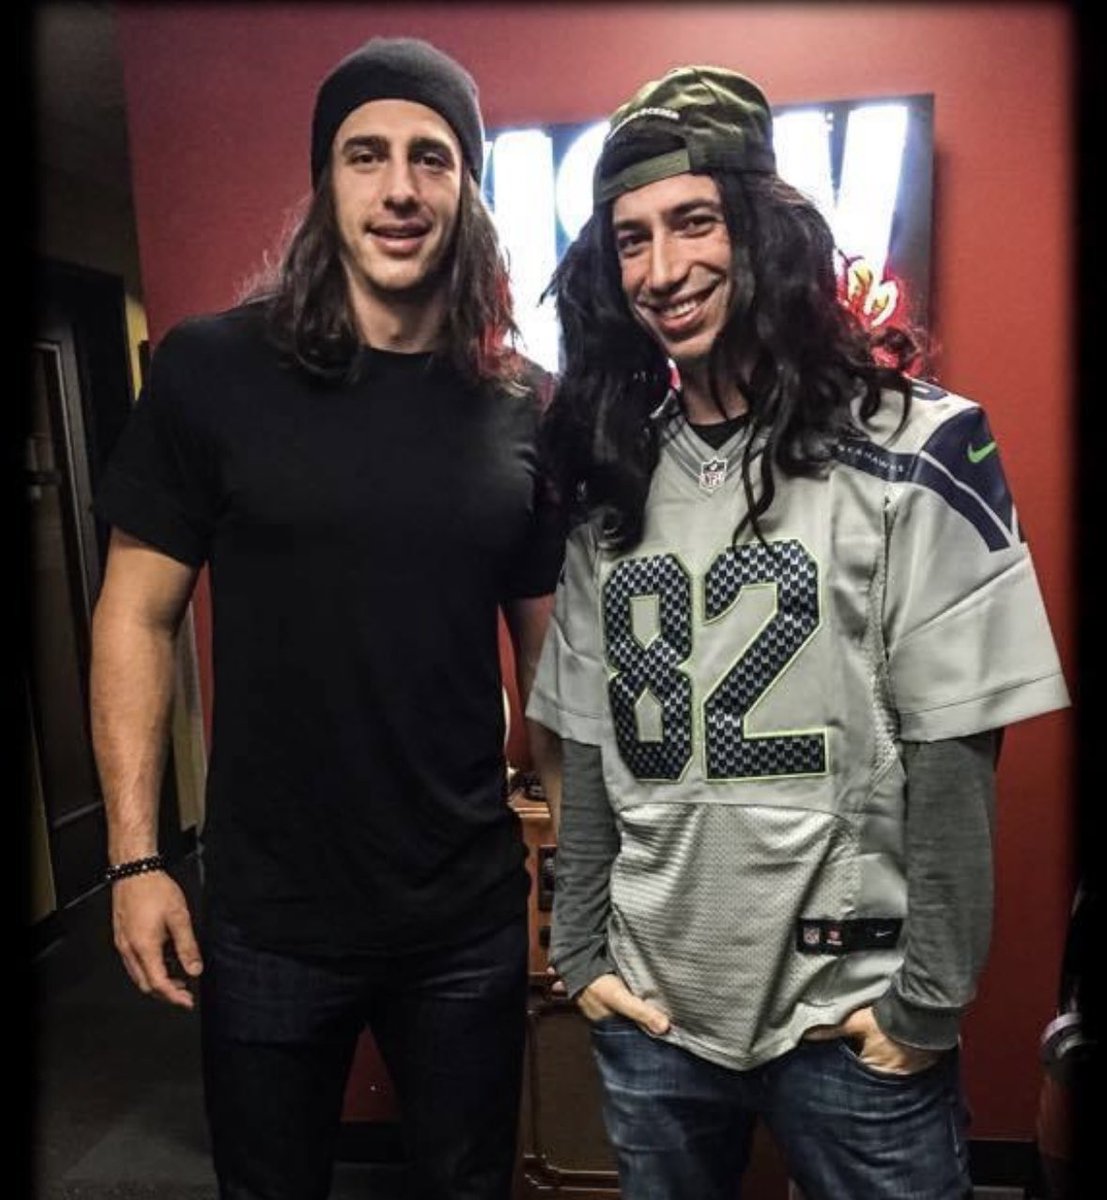 Talking to our buddy @LWillson_82 now all about the draft! Also, how great is this throwback pic 😂